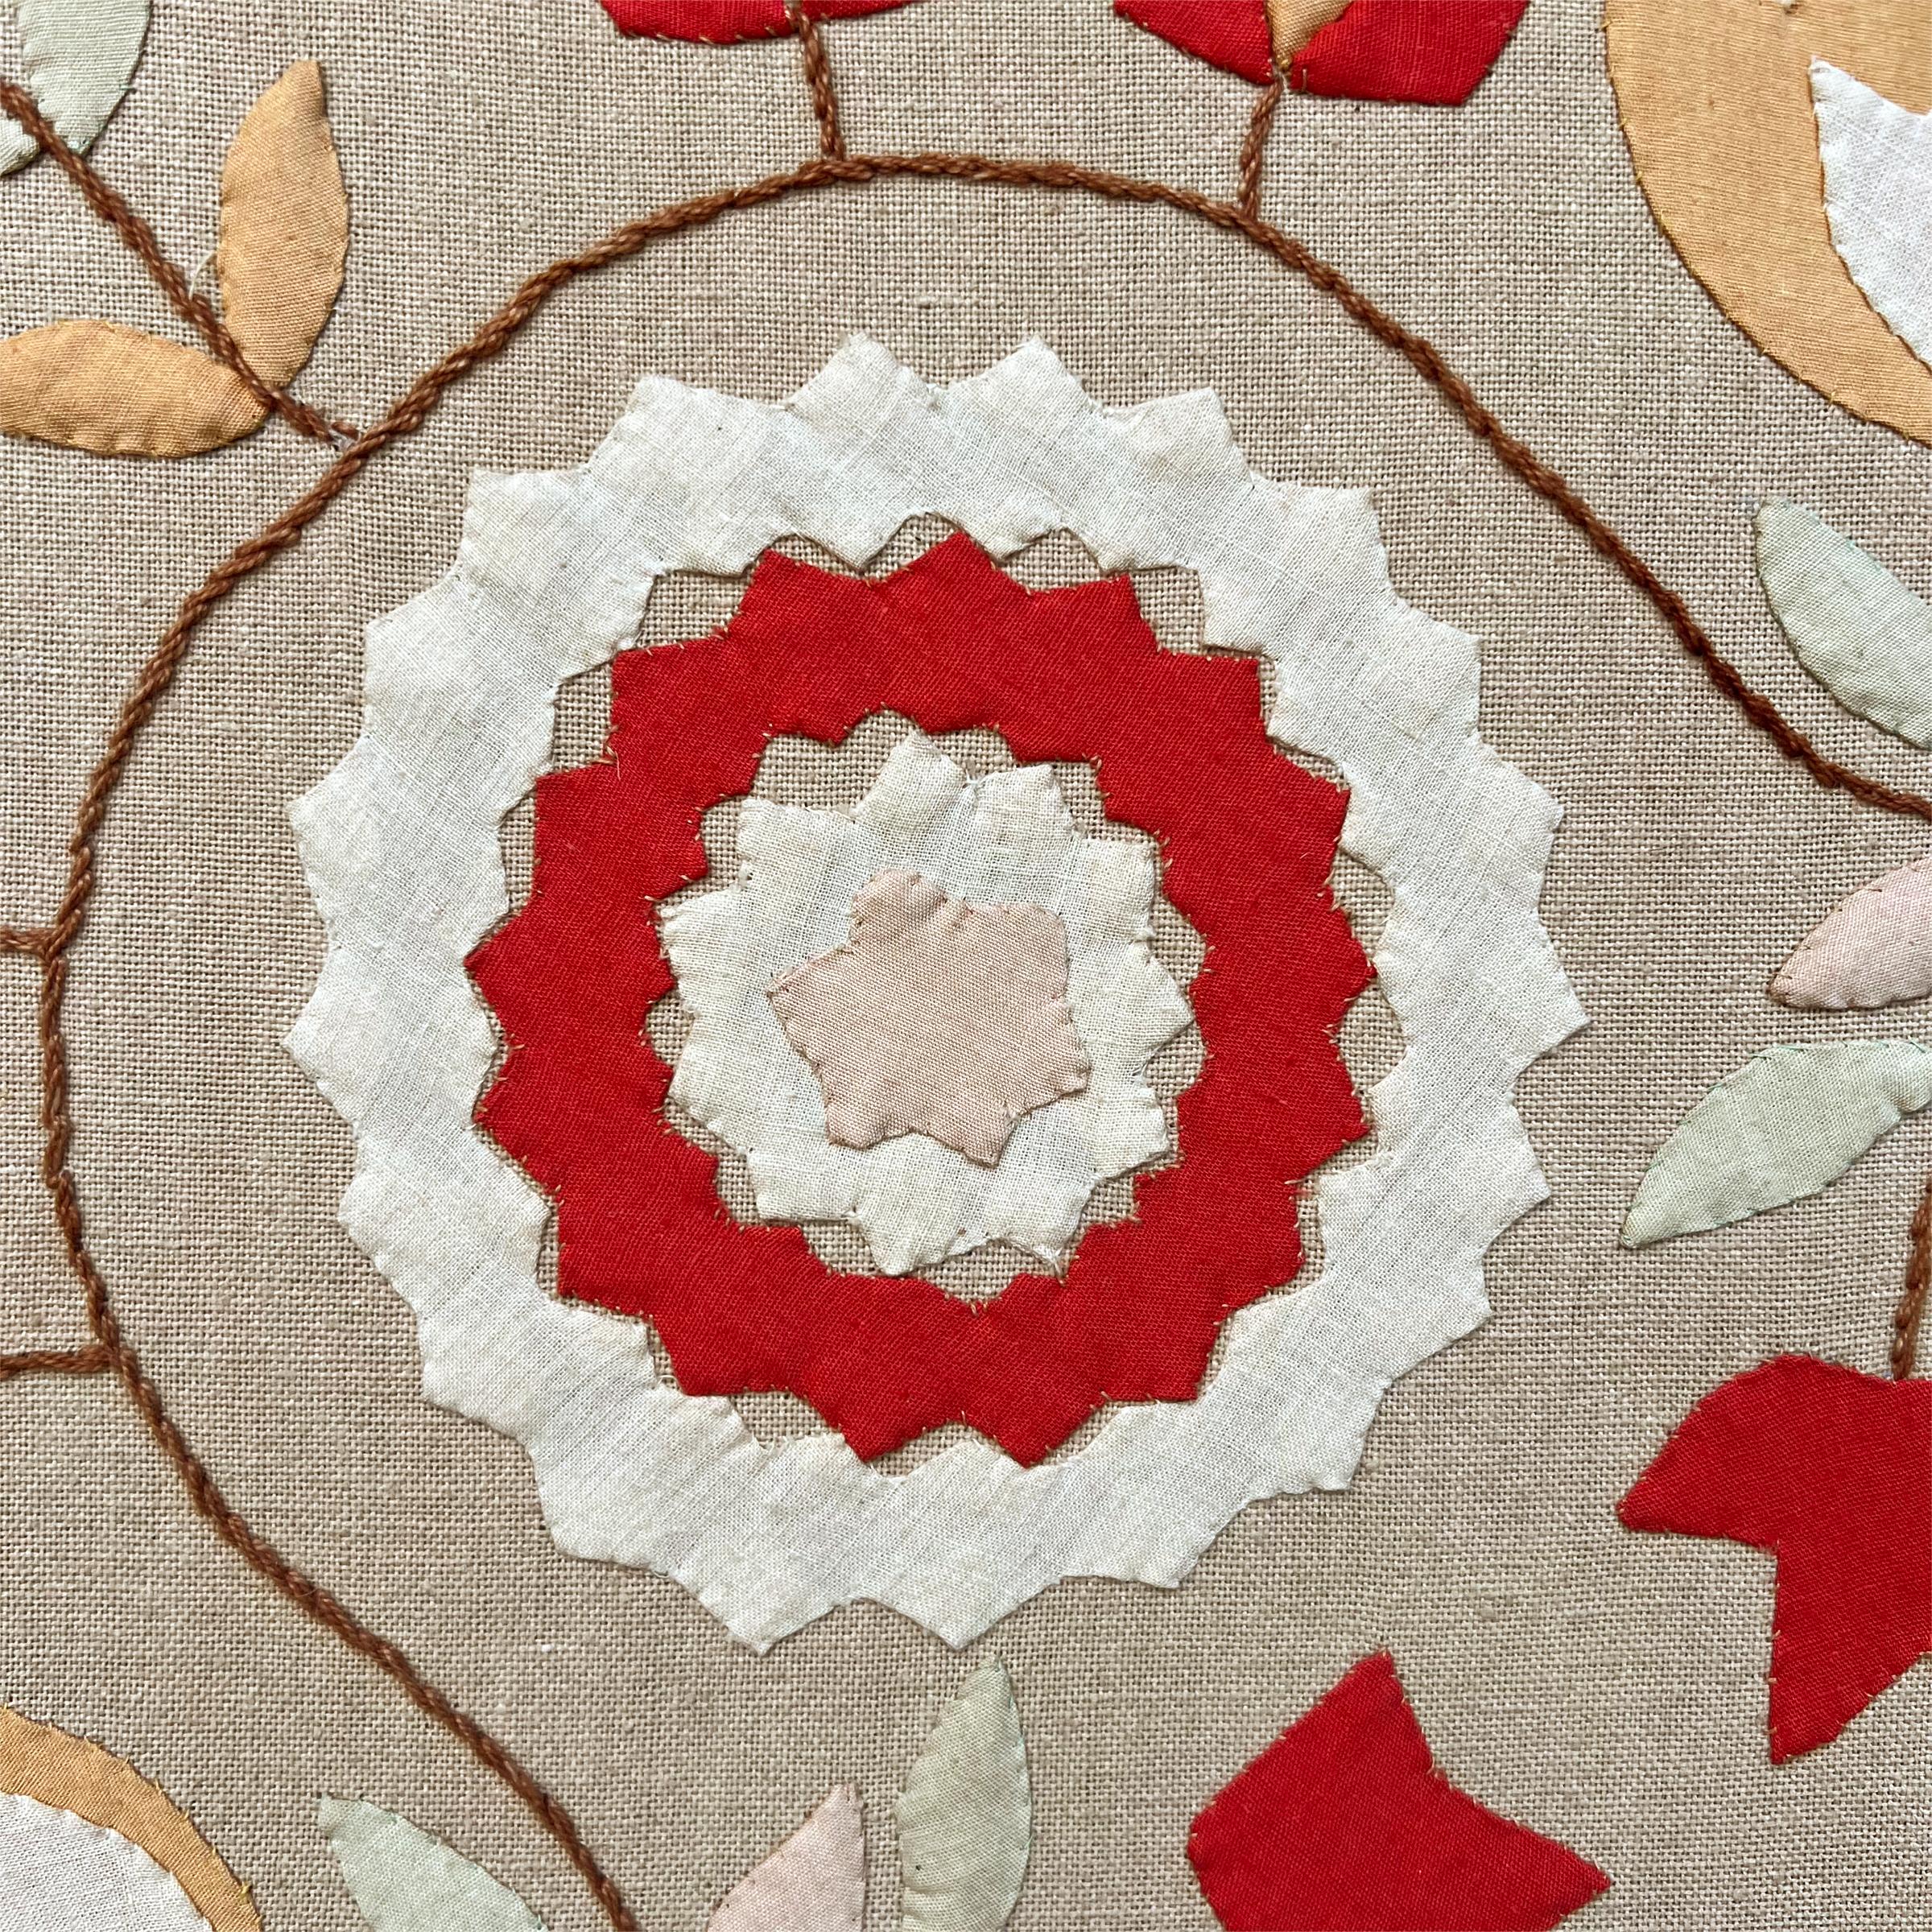 Mounted Late 19th Century American Appliqué Textile For Sale 3